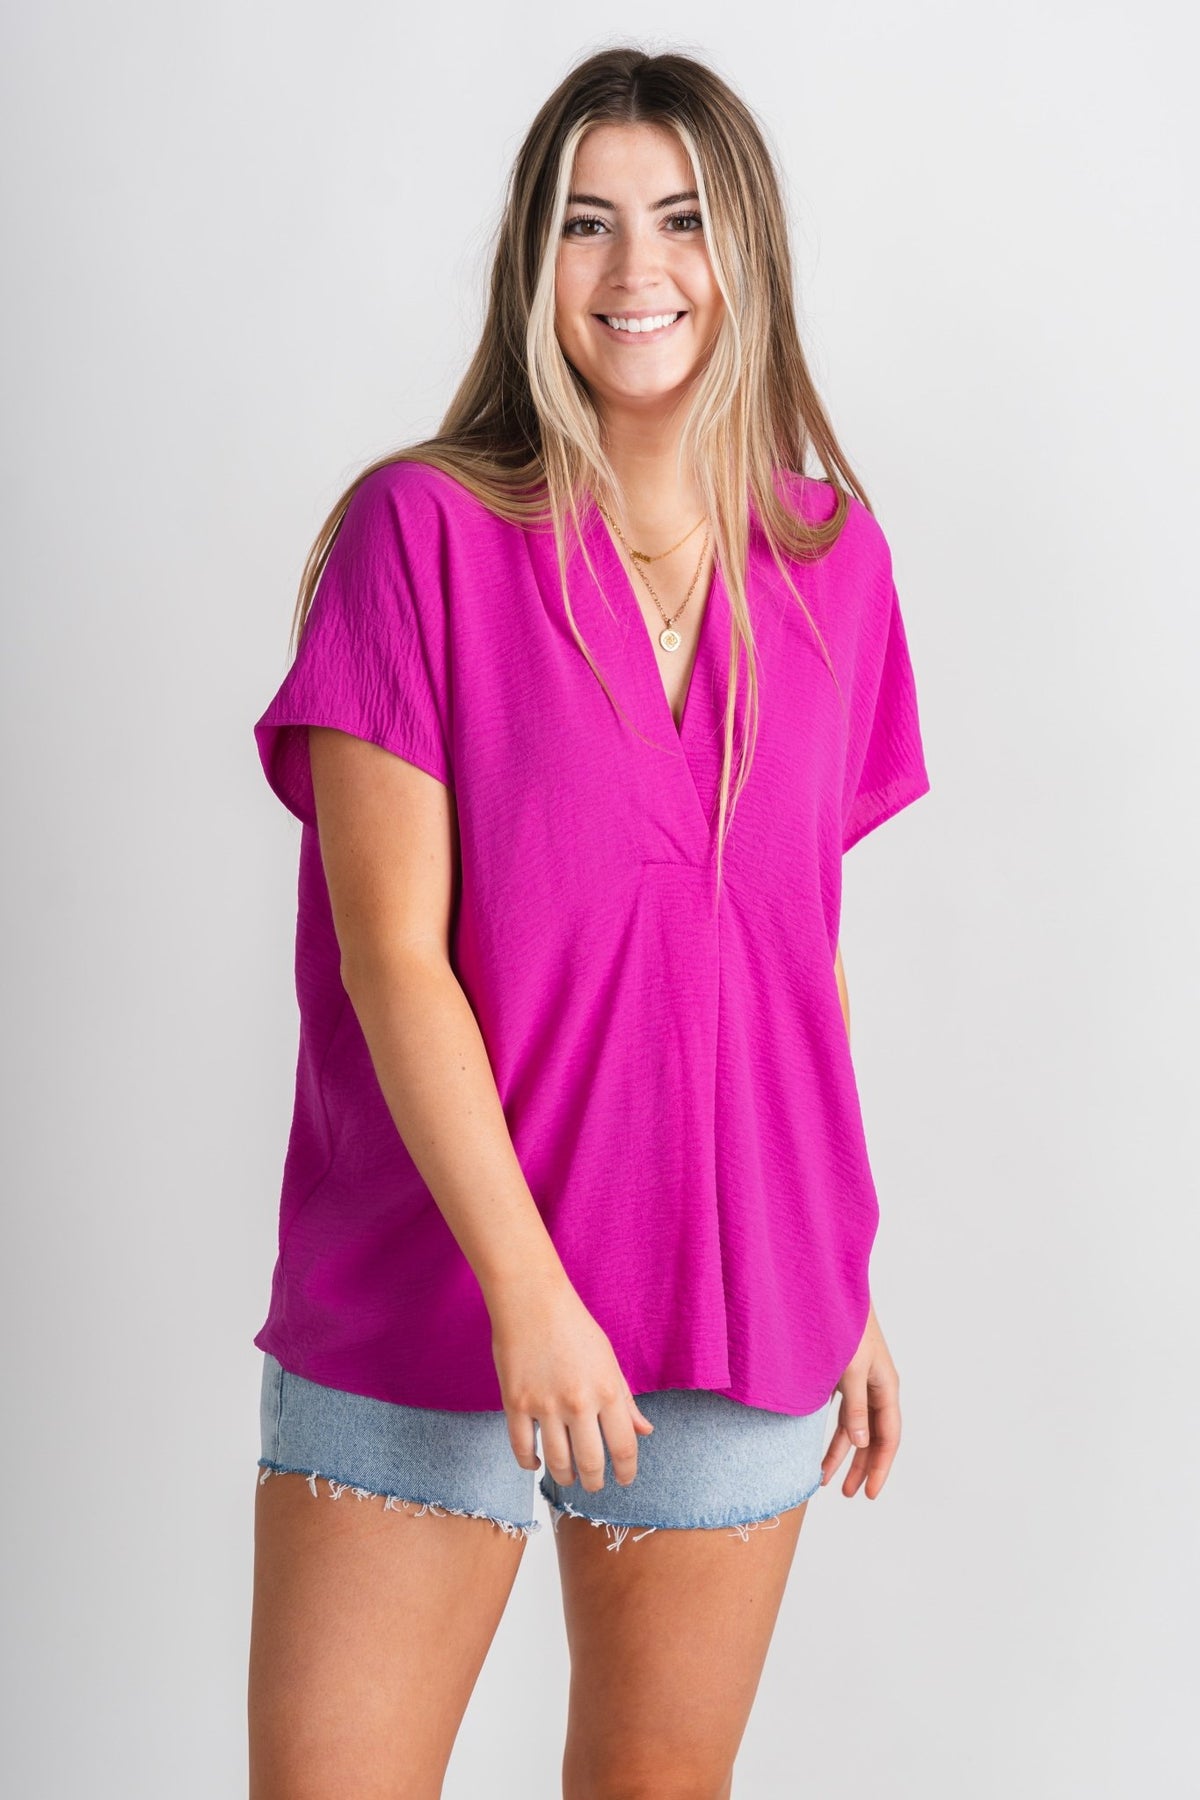 V-neck kaftan top orchid - Trendy Top - Cute Vacation Collection at Lush Fashion Lounge Boutique in Oklahoma City